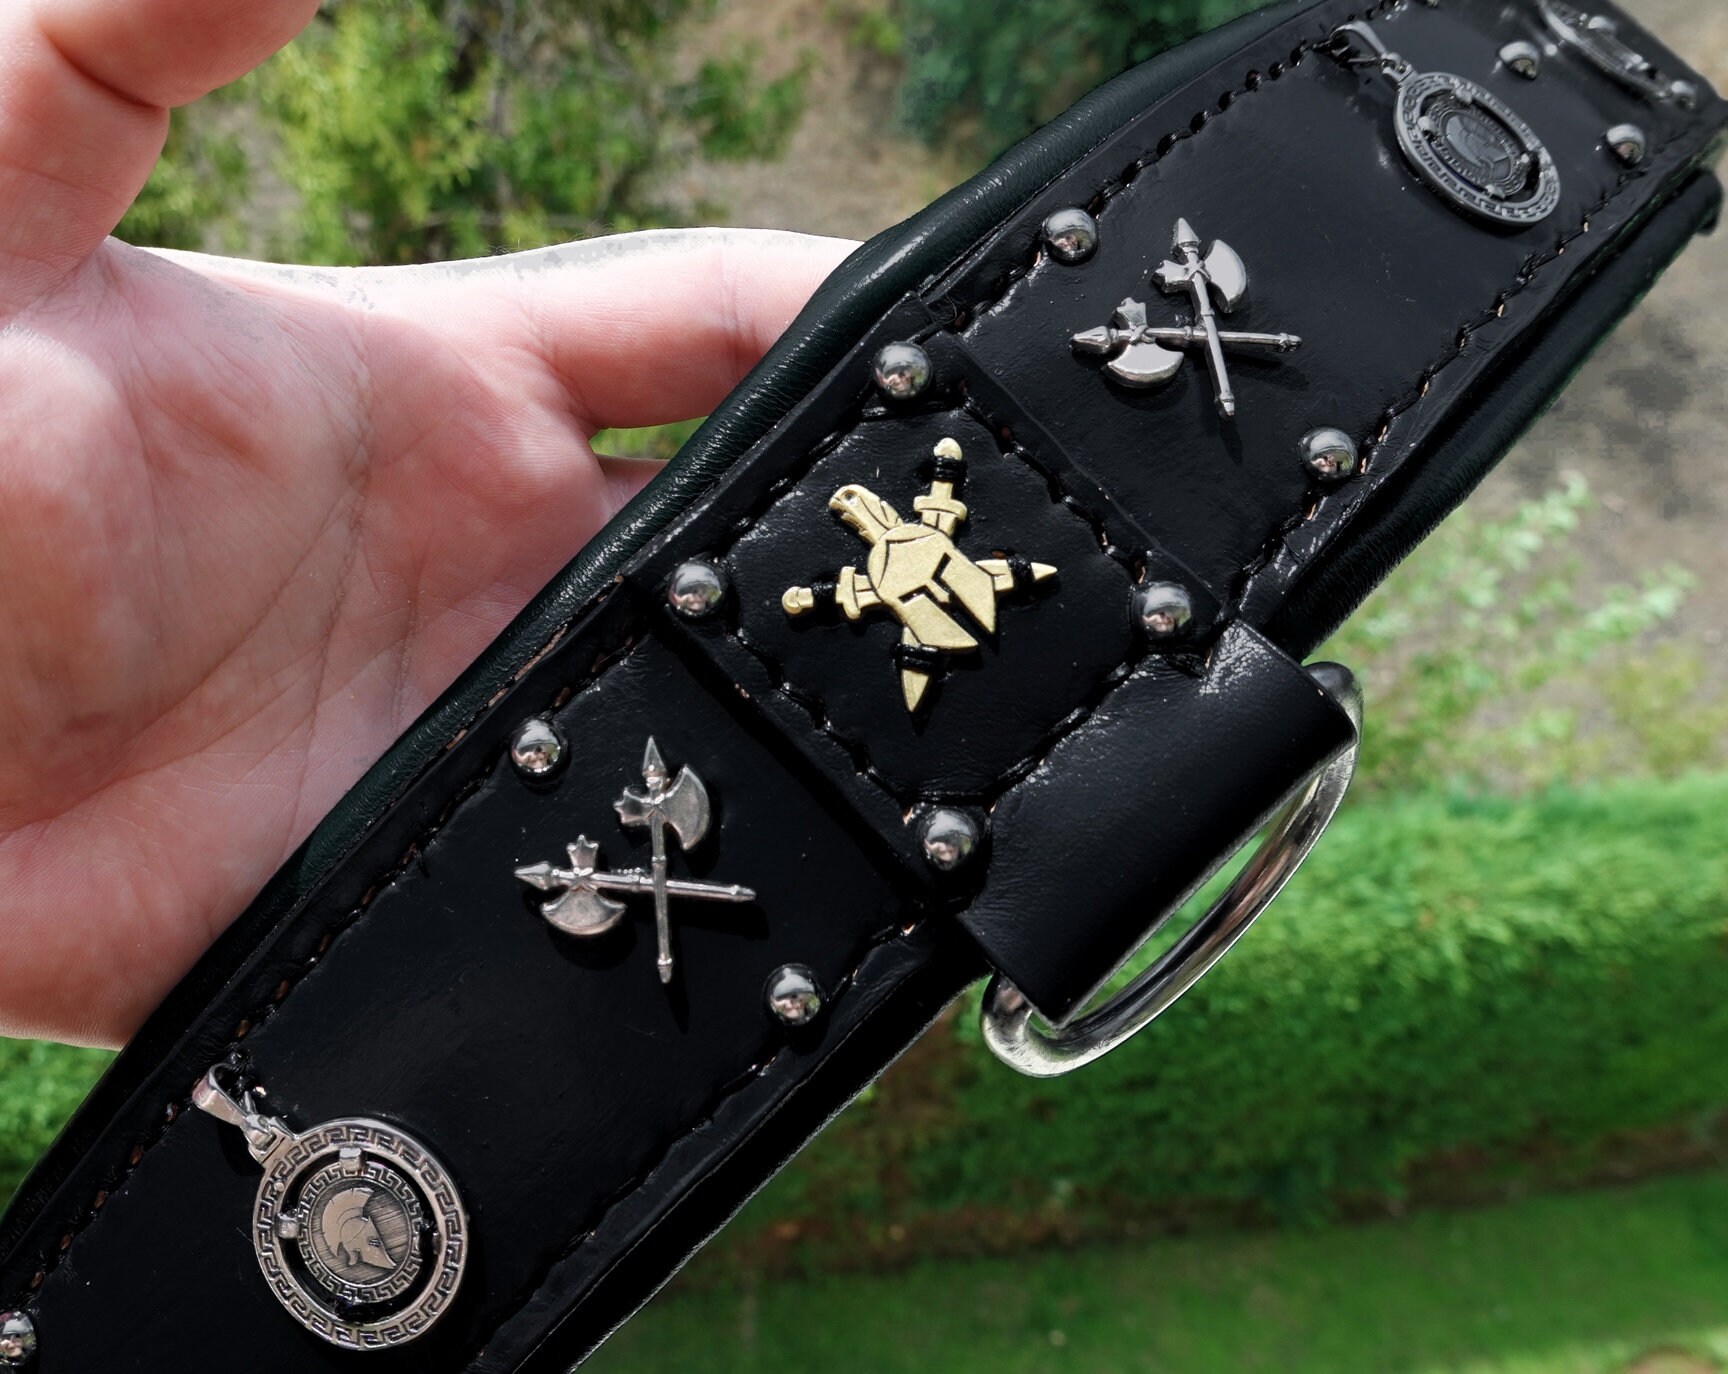 2 Inch Leather Dog Collar With Gothic Skulls and Soft Padding